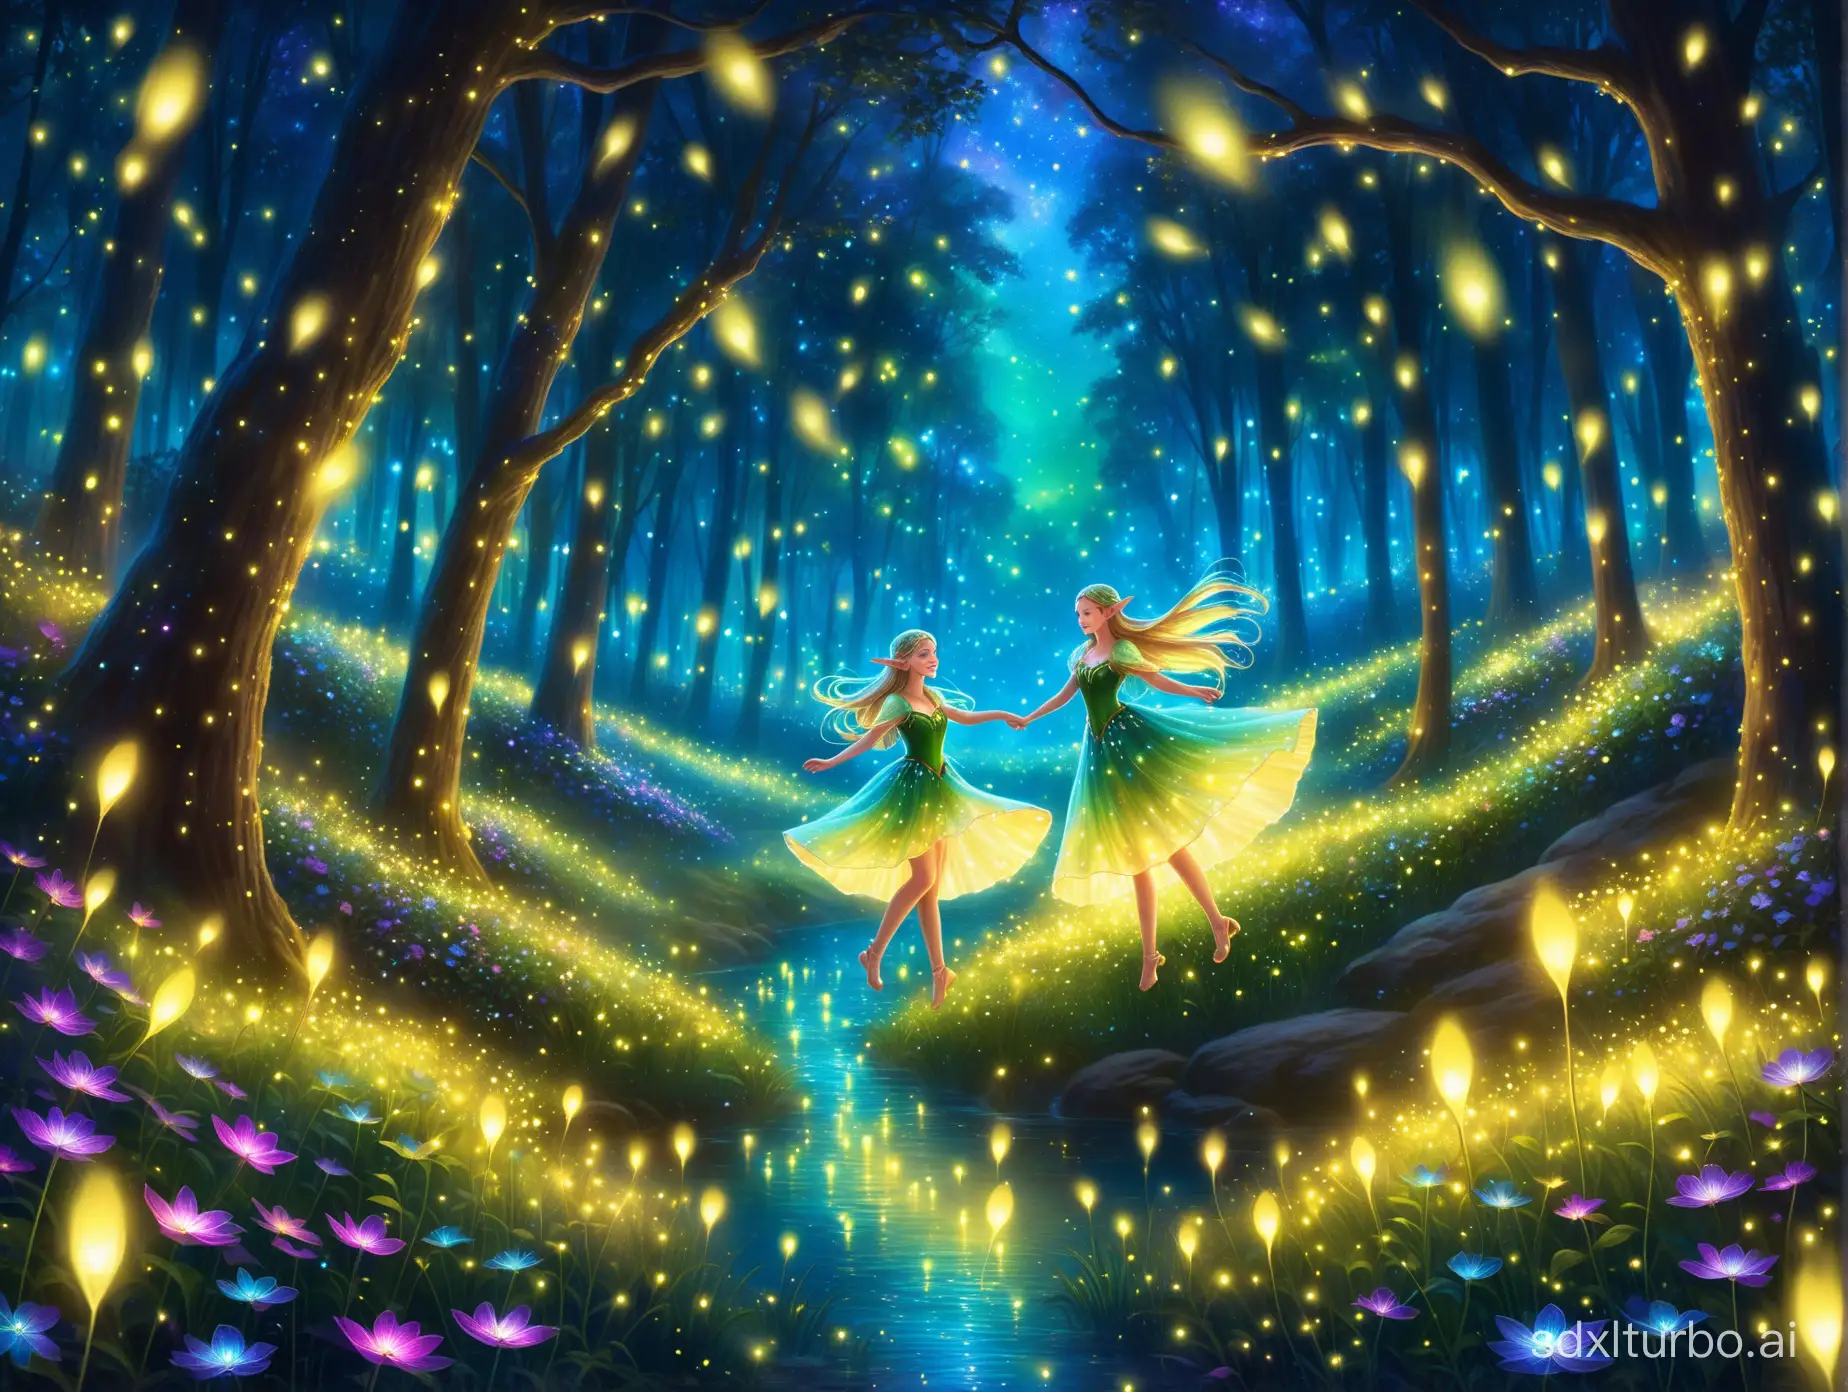 Elves, flower skirts, dancing in the dreamy forest. Fireflies swirling, nocturnal plants, with dreamlike lights. Highly detailed, realistic, fantasy storybook style. Bright colors, ethereal beauty.